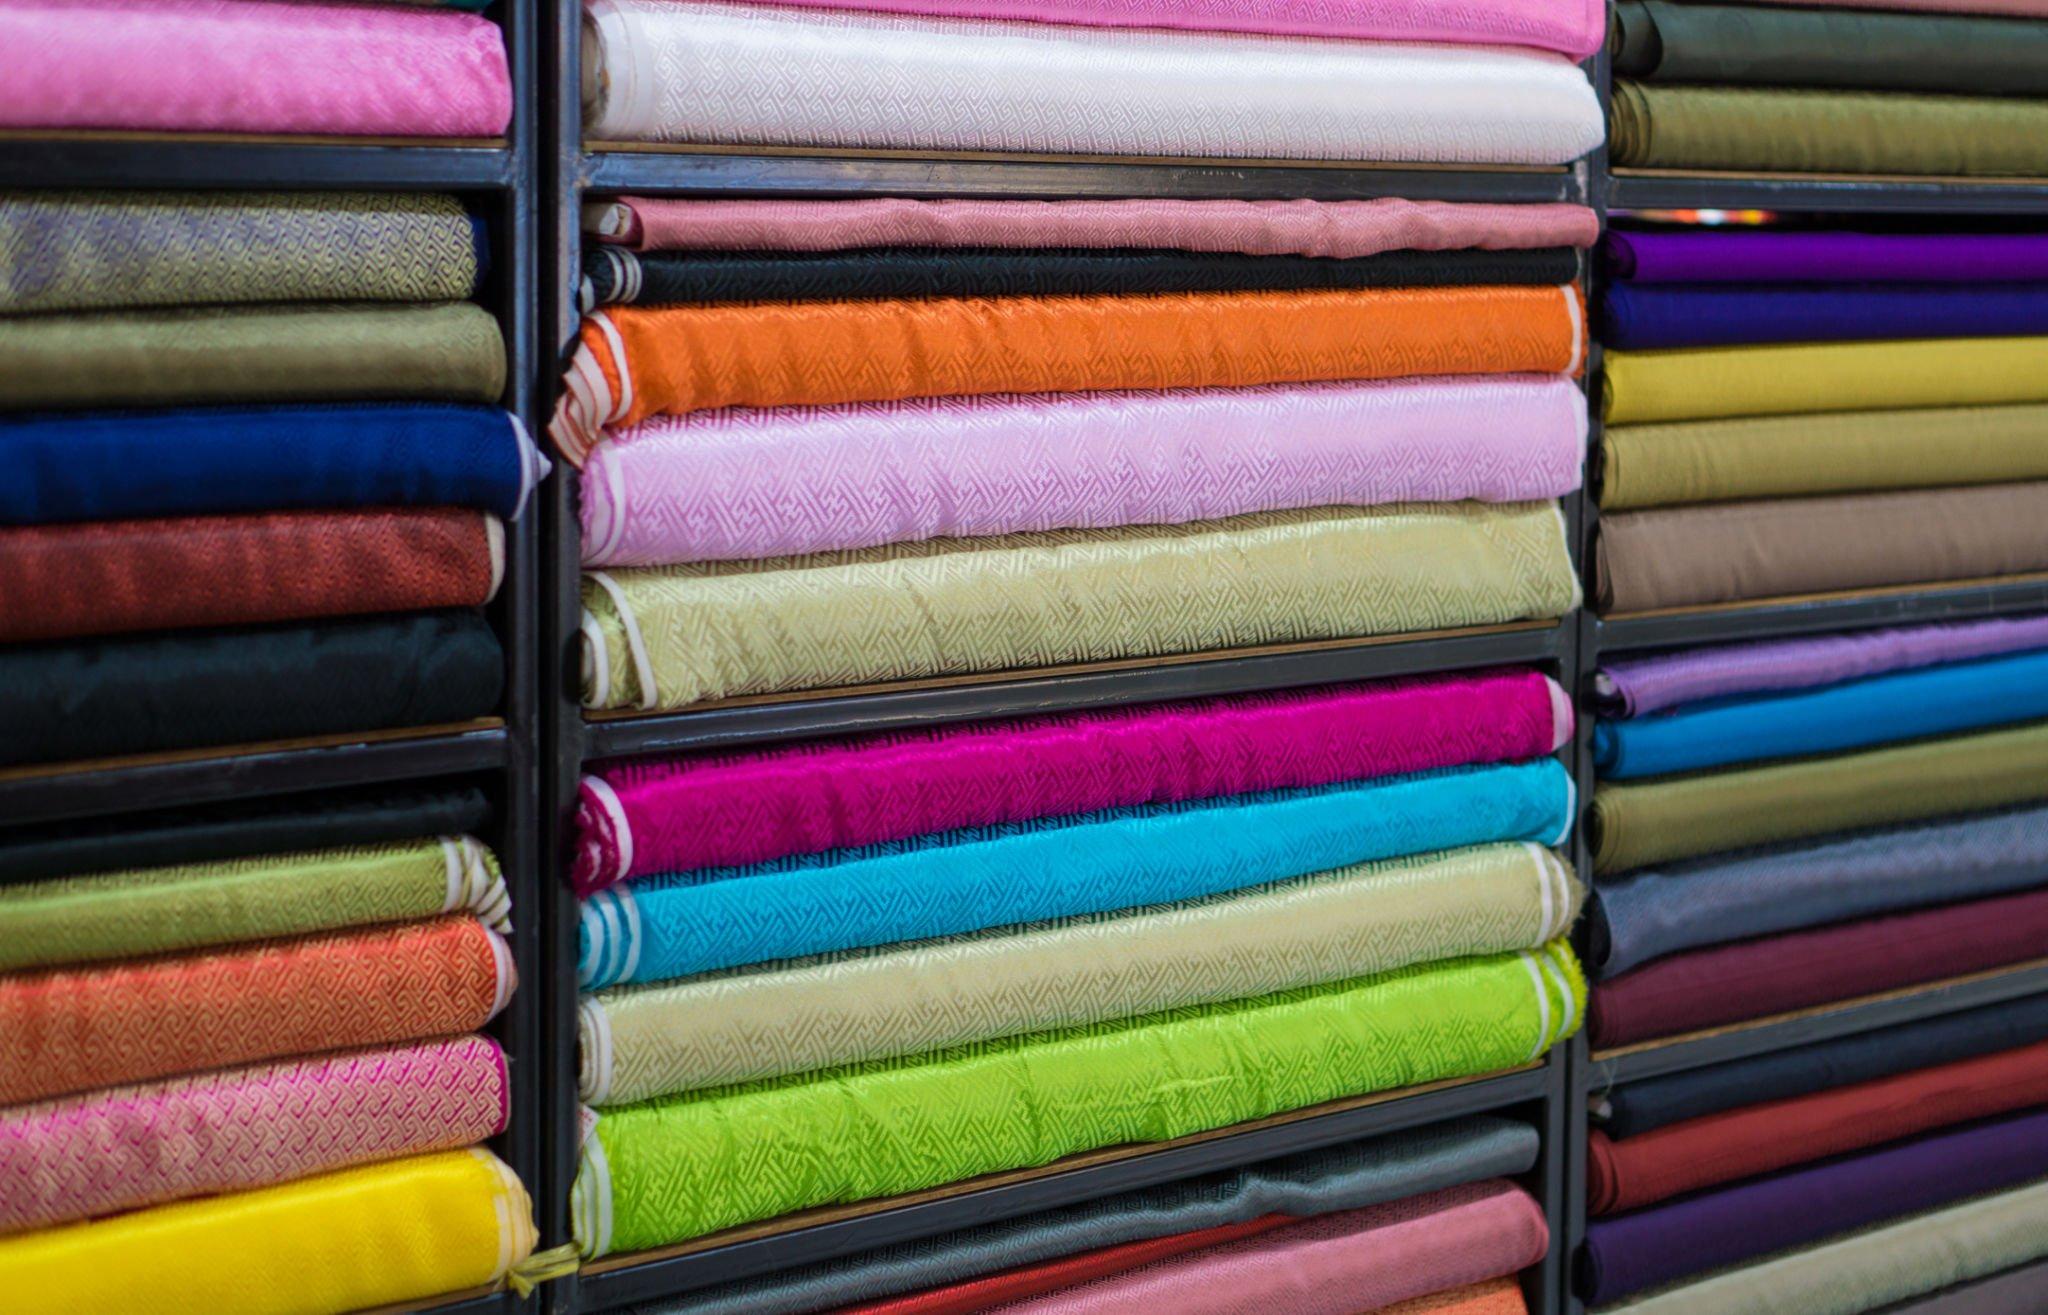 Choose Quality – Purchase Fabrics That Meet the Standard Requirements ...